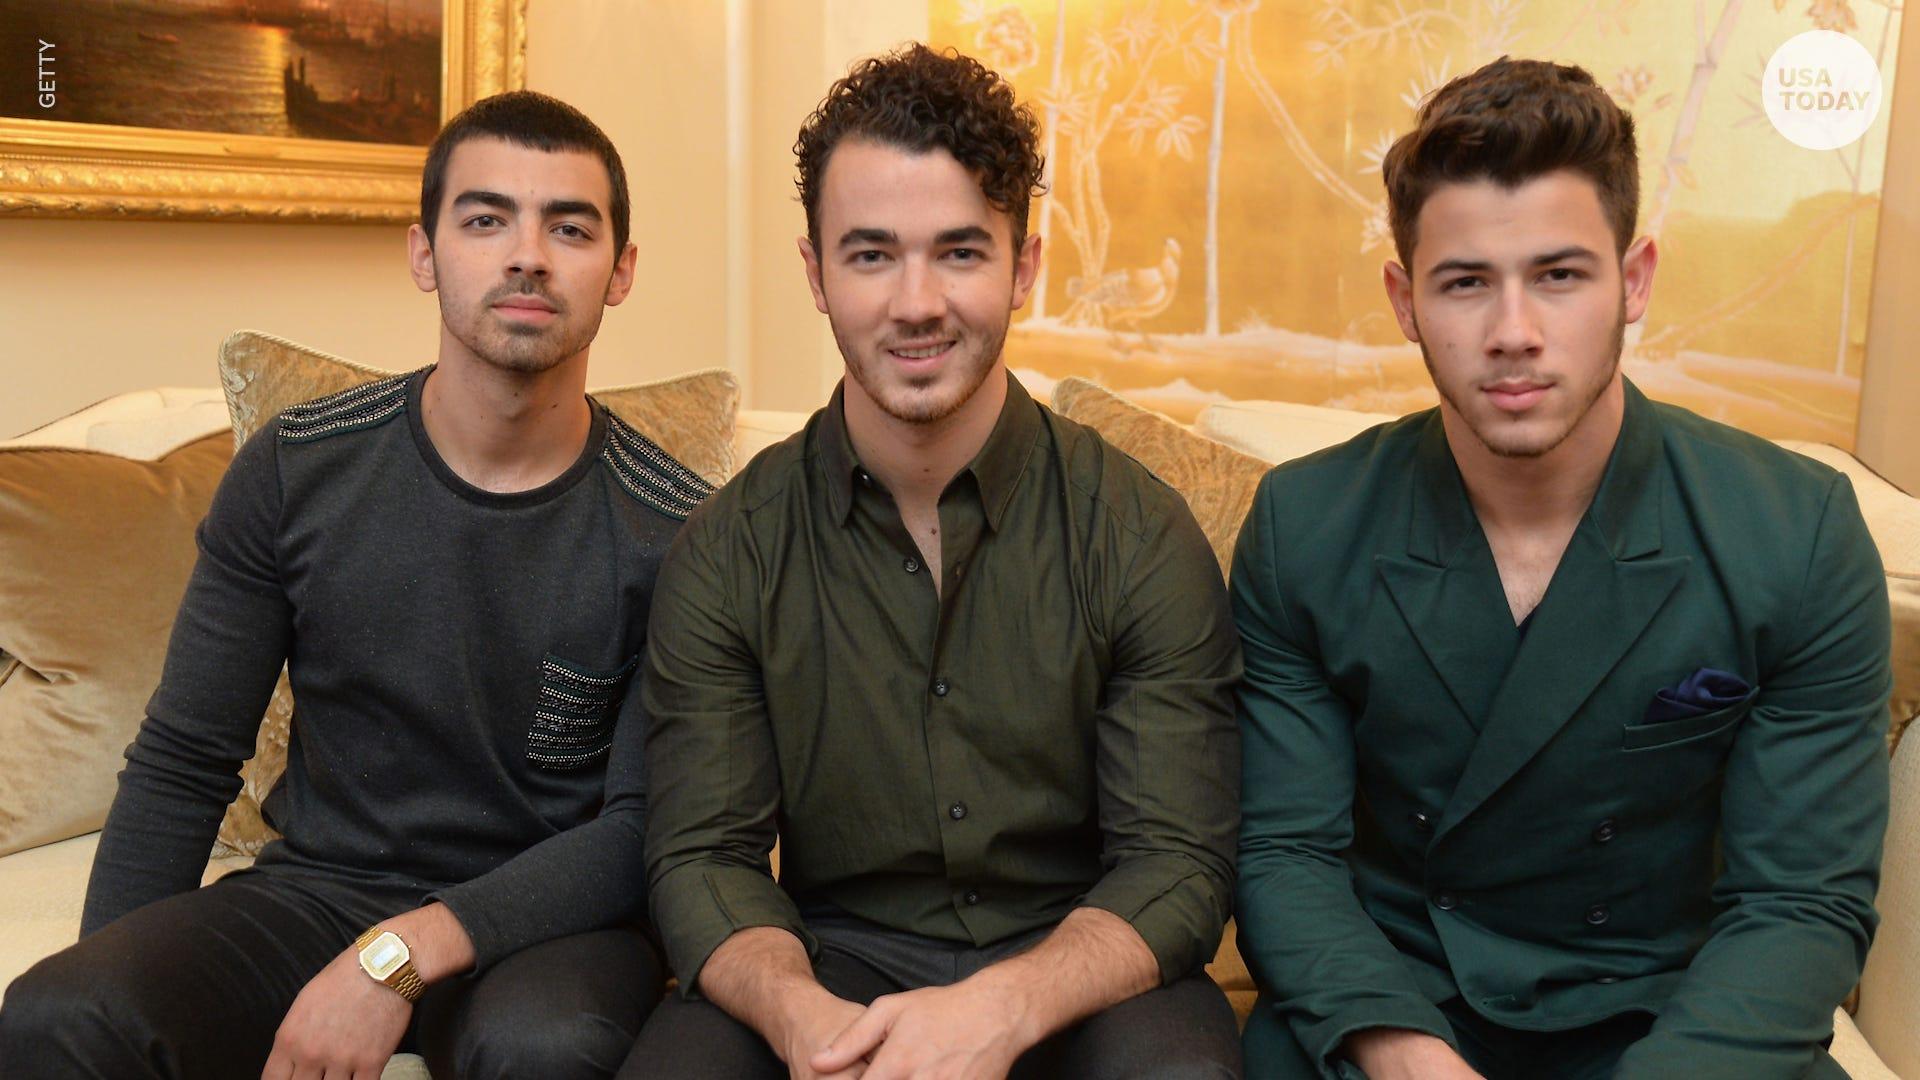 The Jonas Brothers spent a year 'basically doing therapy'